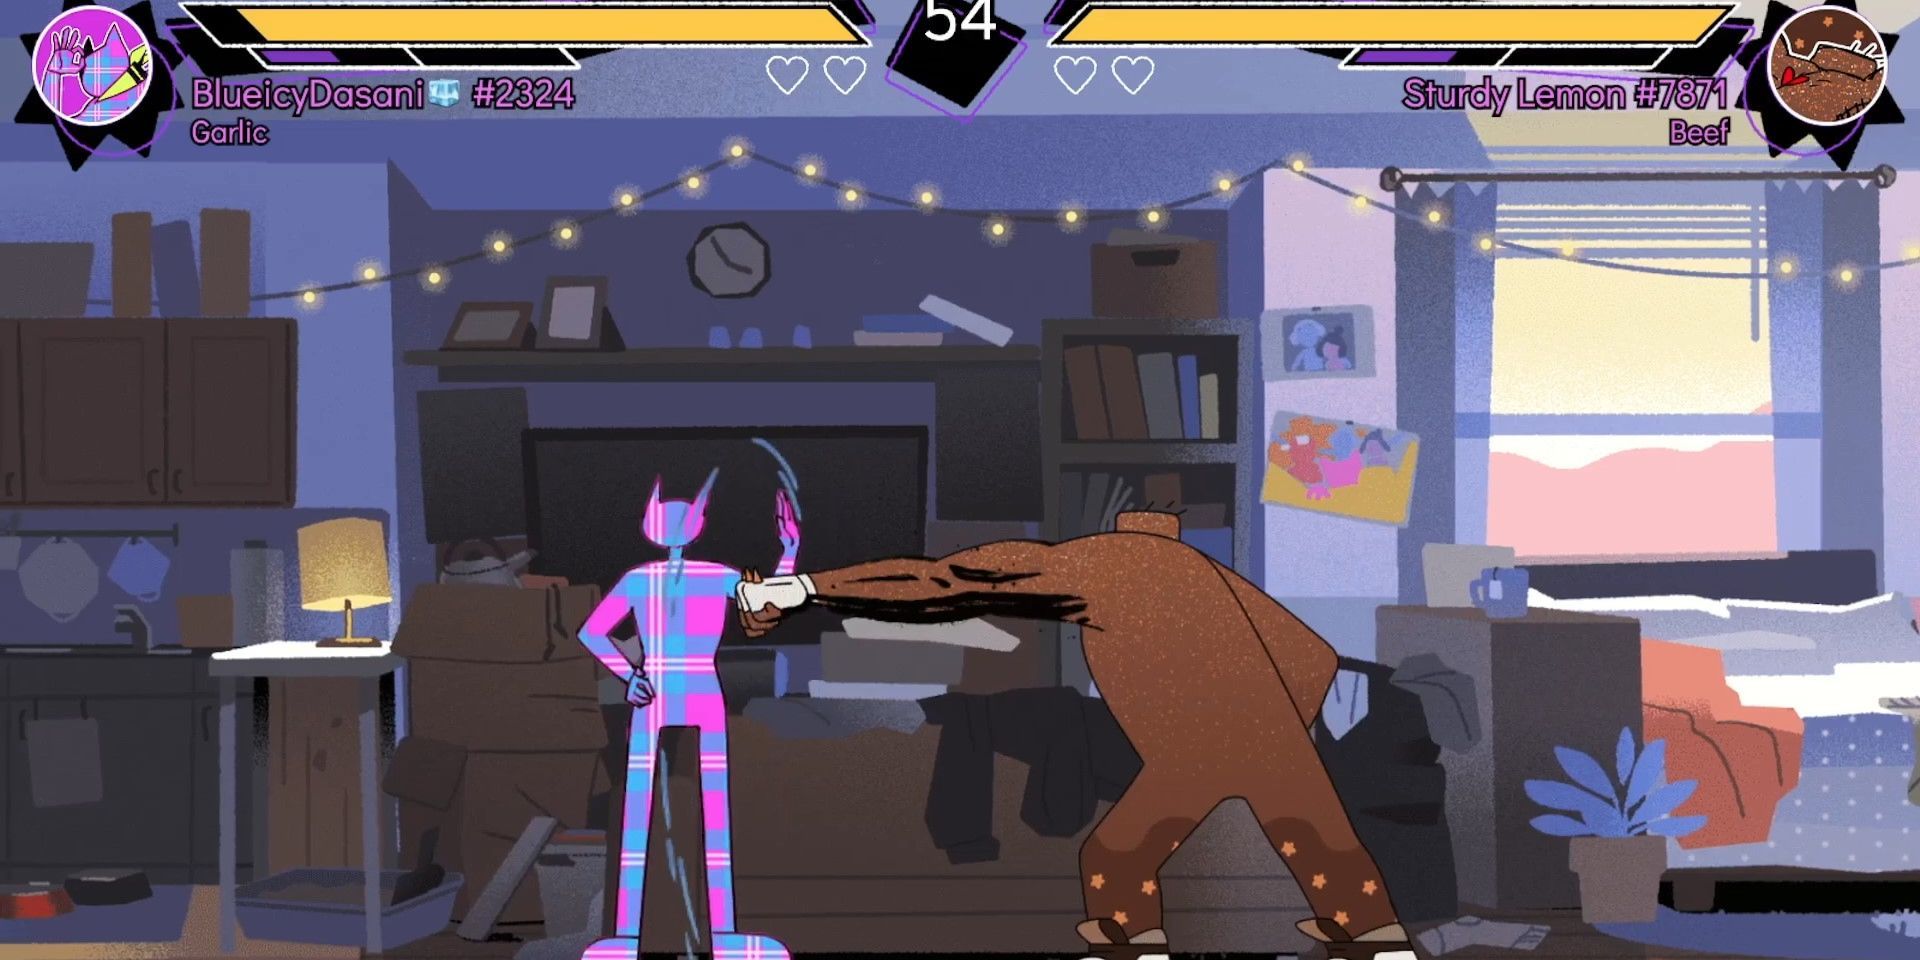 A screenshot from Though Love Arena